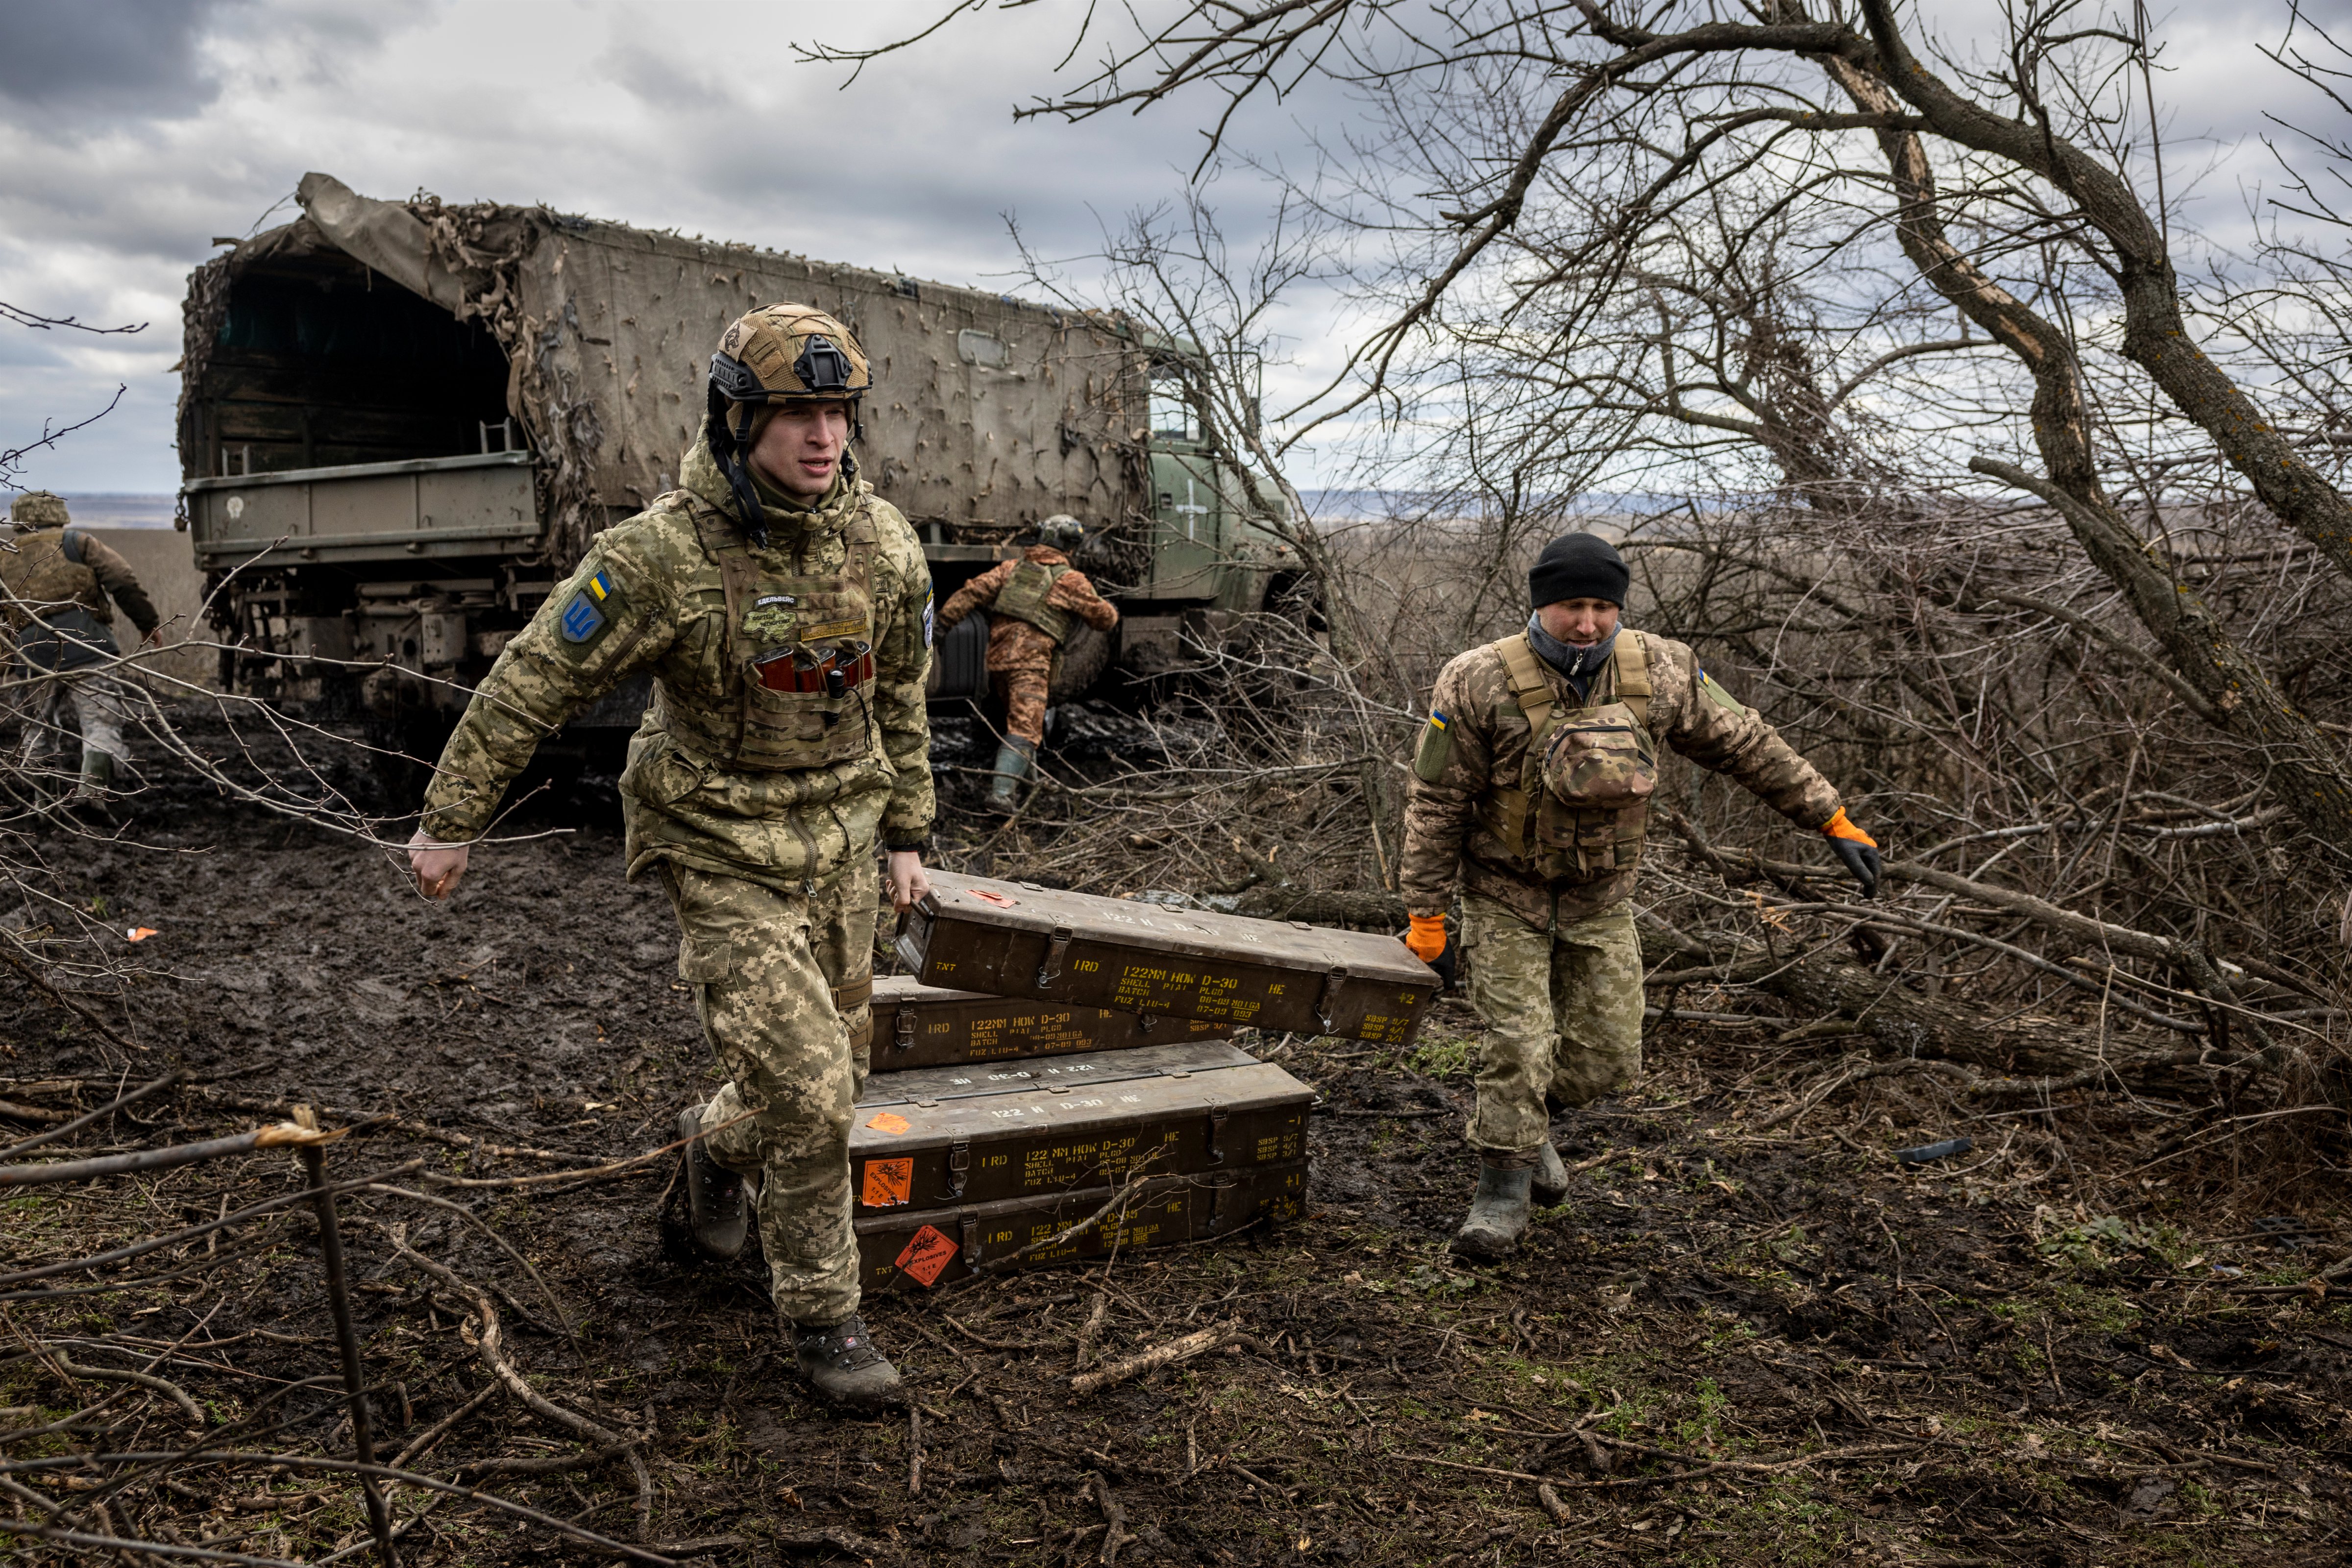 Ukrainian soldiers unload artillery shells at their frontline position in the Donetsk Region, March 02, 2023. (John Moore—Getty Images)